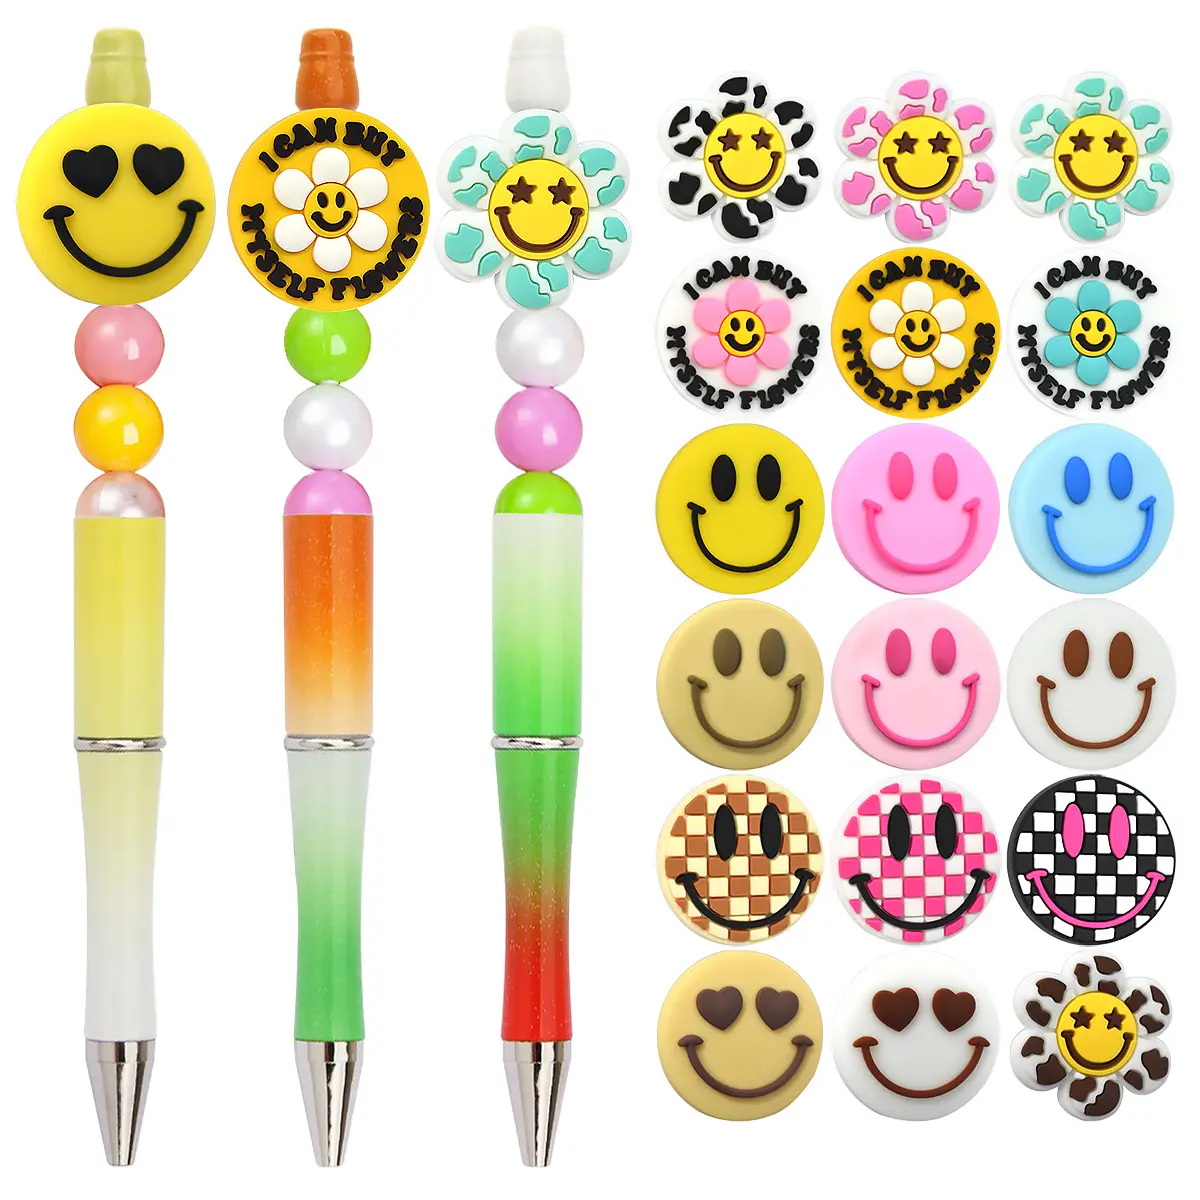 New Silicone Smile Mini Beads Food-grade Chewing Teeth Bead For Crafts Diy Nipple Chain Jewelry Accessories